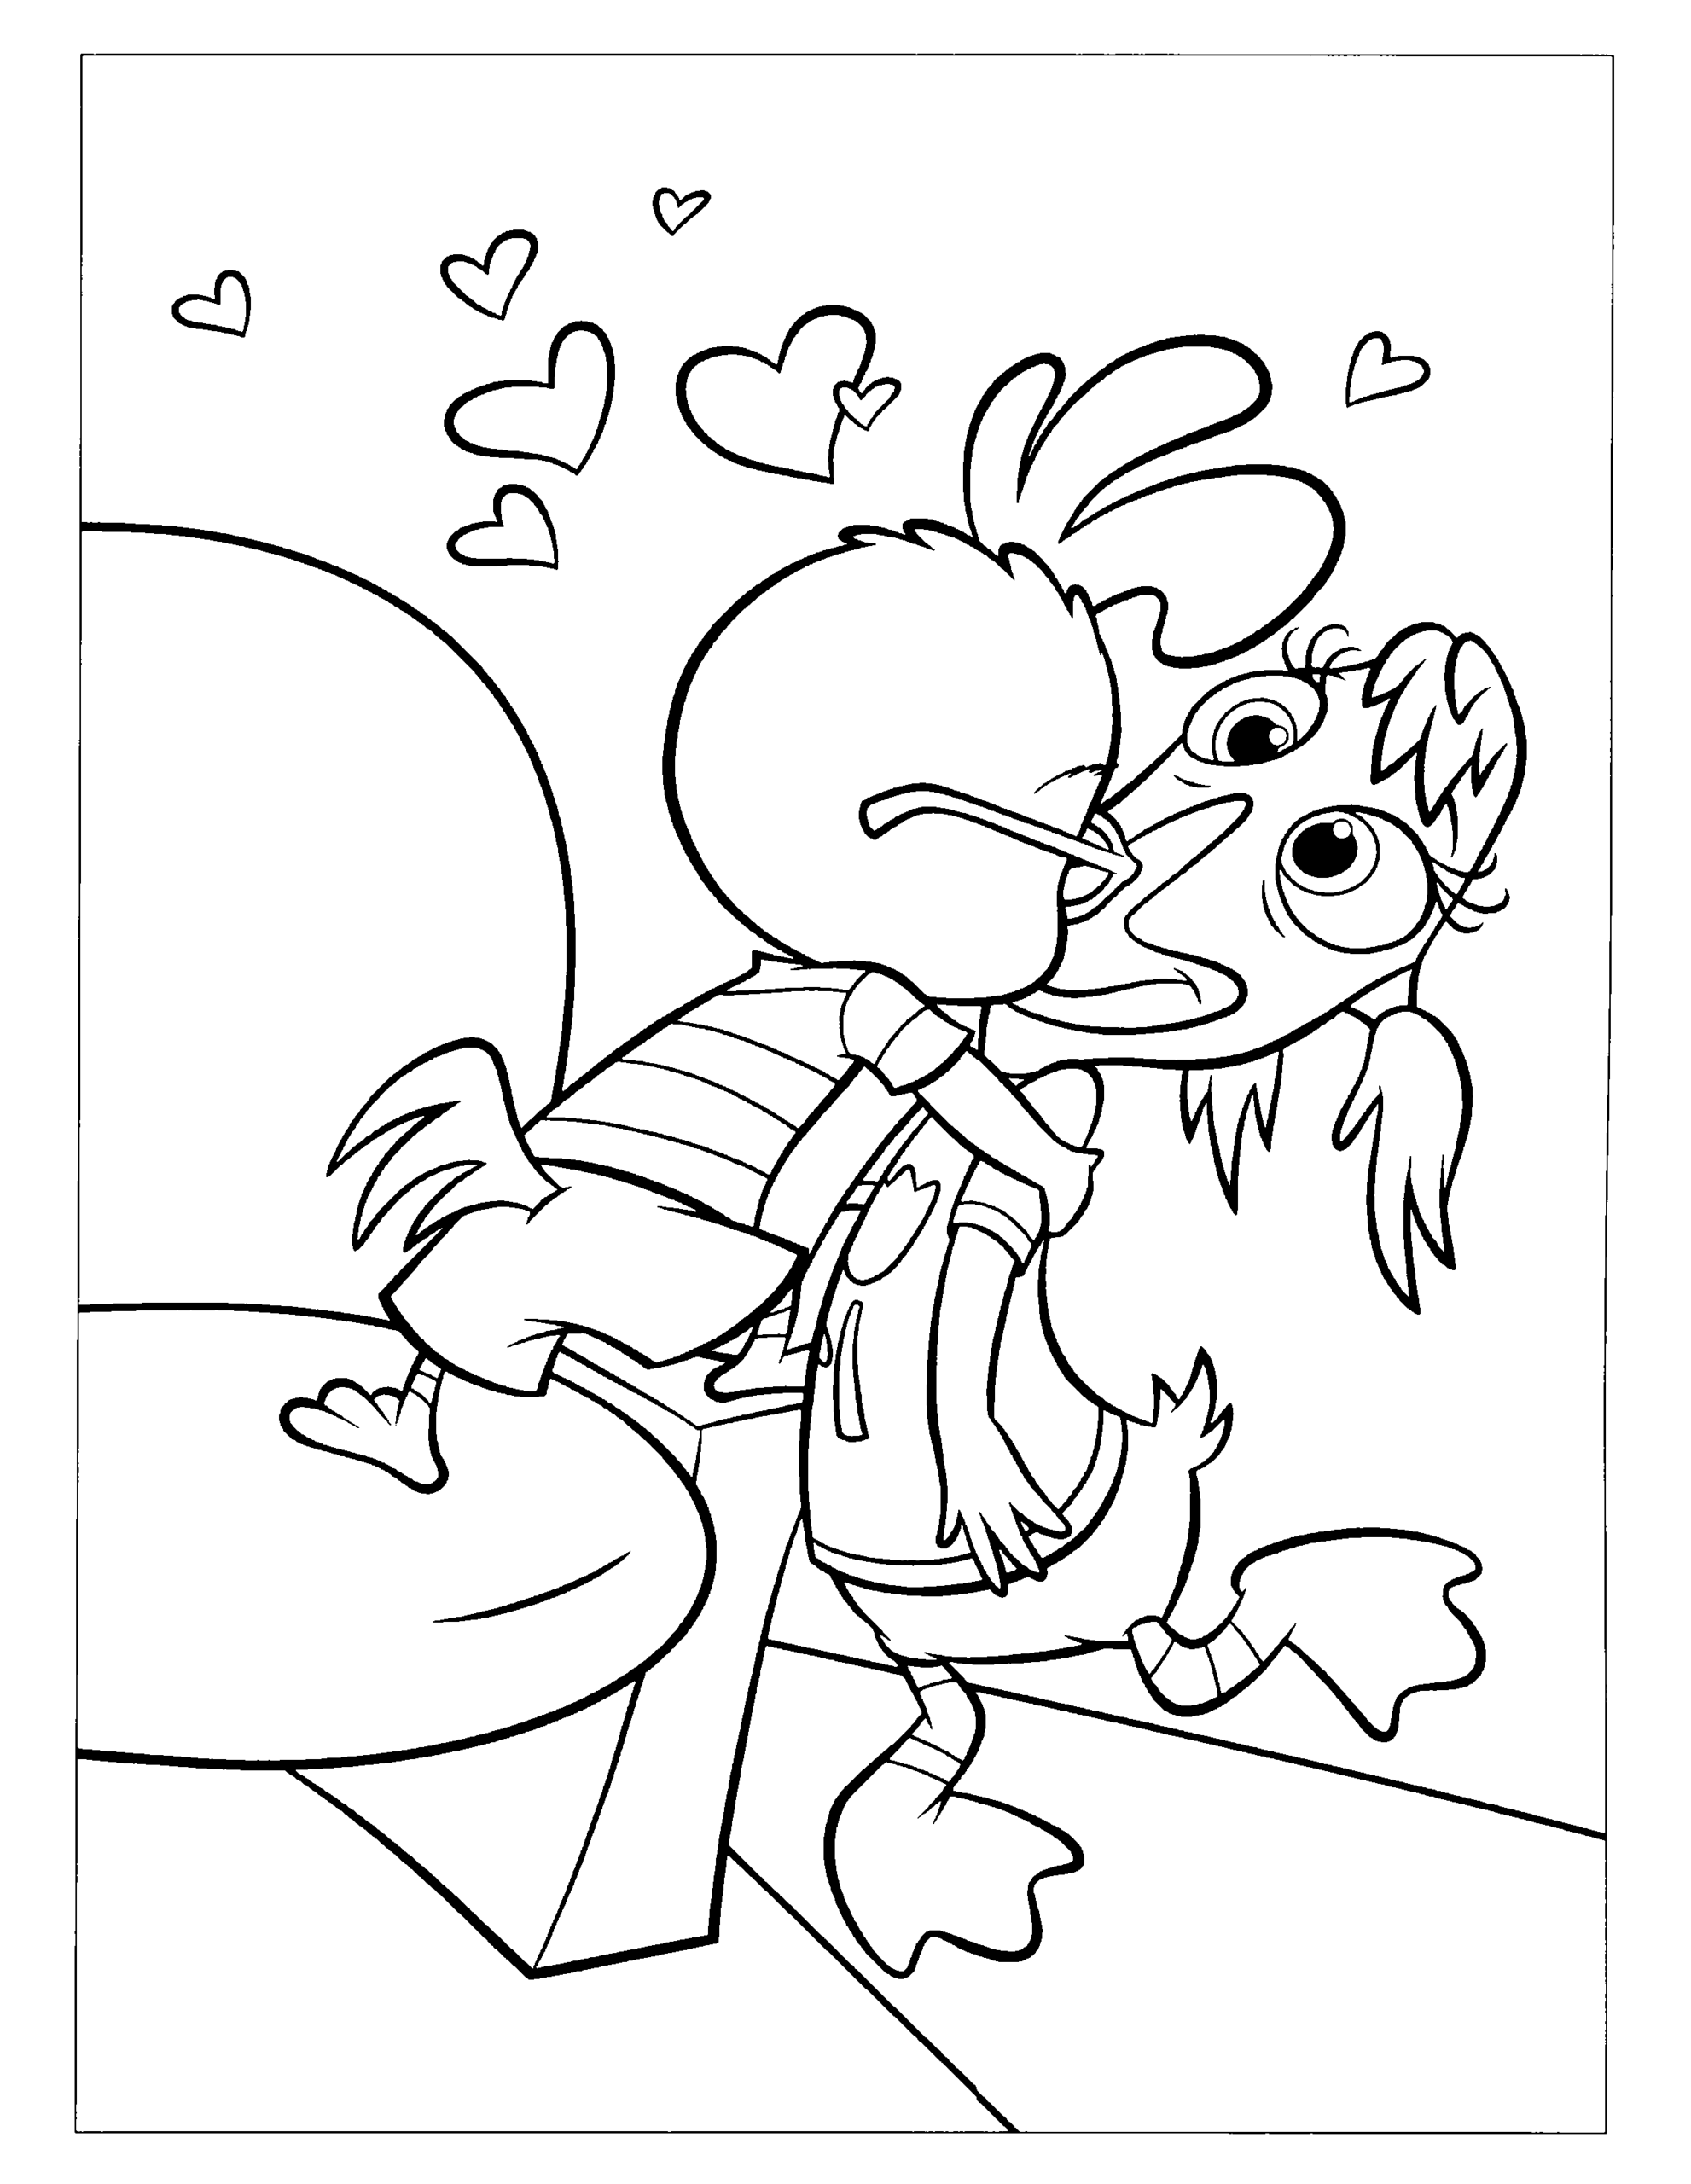 Chicken Little Coloring Pages TV Film chicken little 7 Printable 2020 02094 Coloring4free